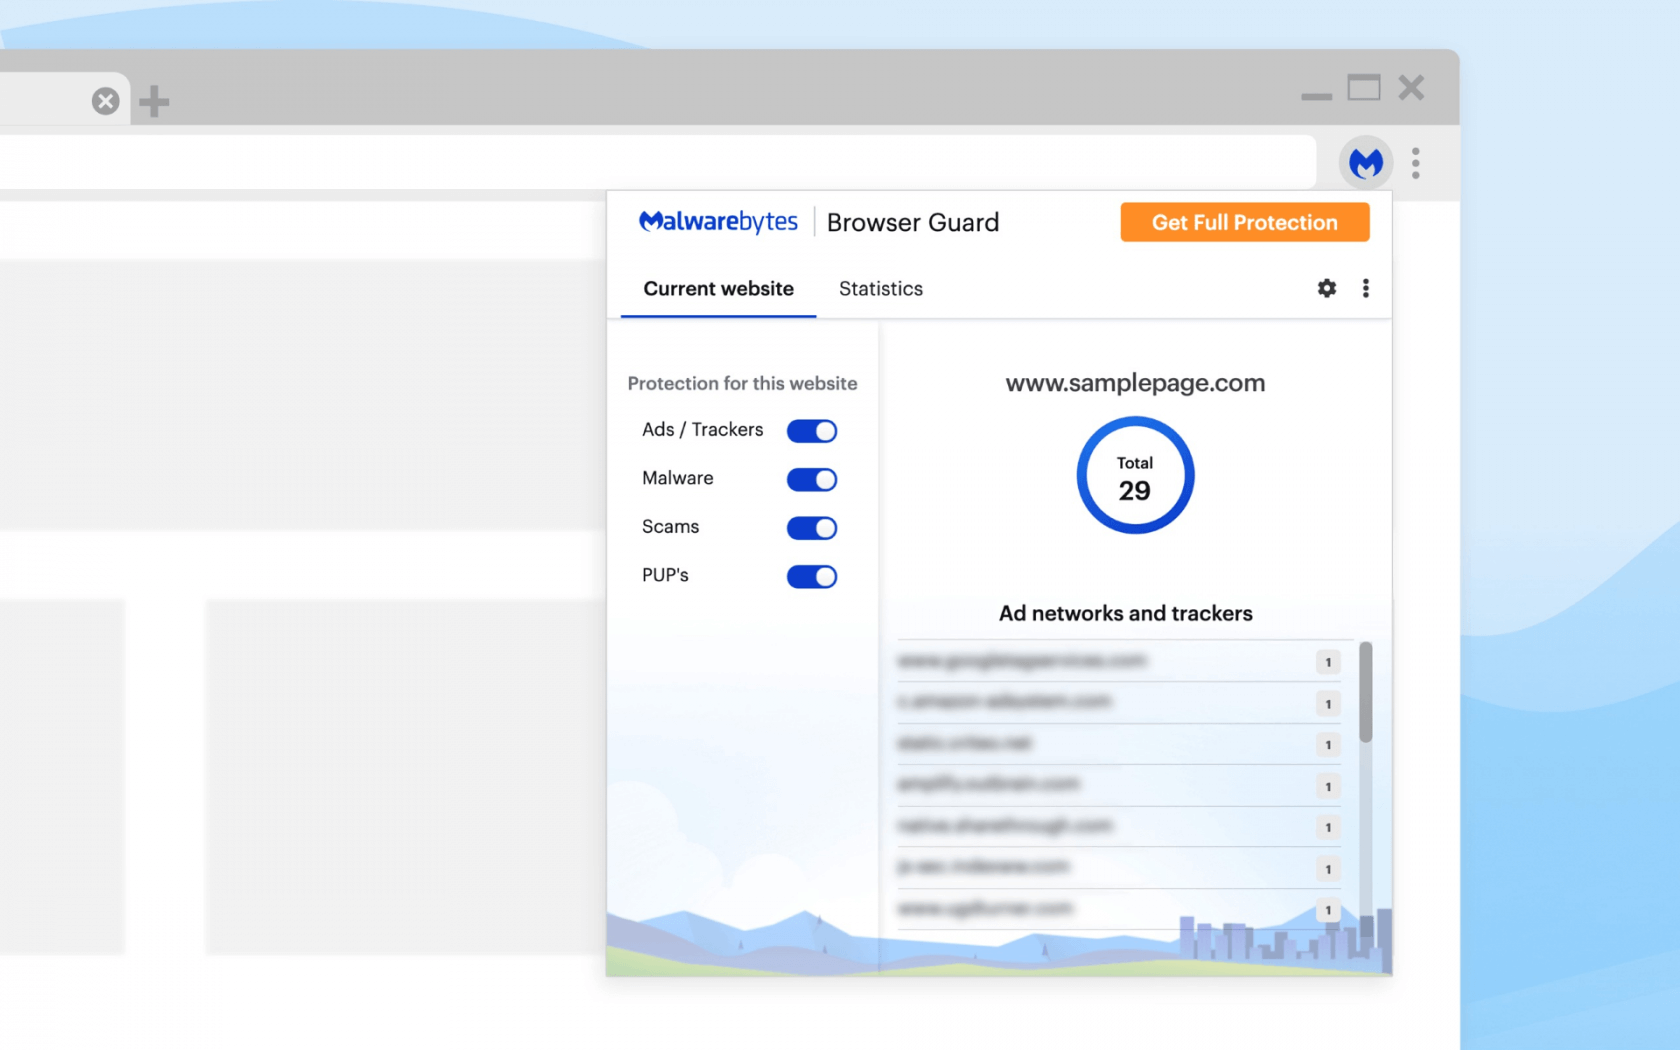 Malwarebytes' 'Browser Guard' add-on blocks browser hijacking, pop-up scams, and other annoyances